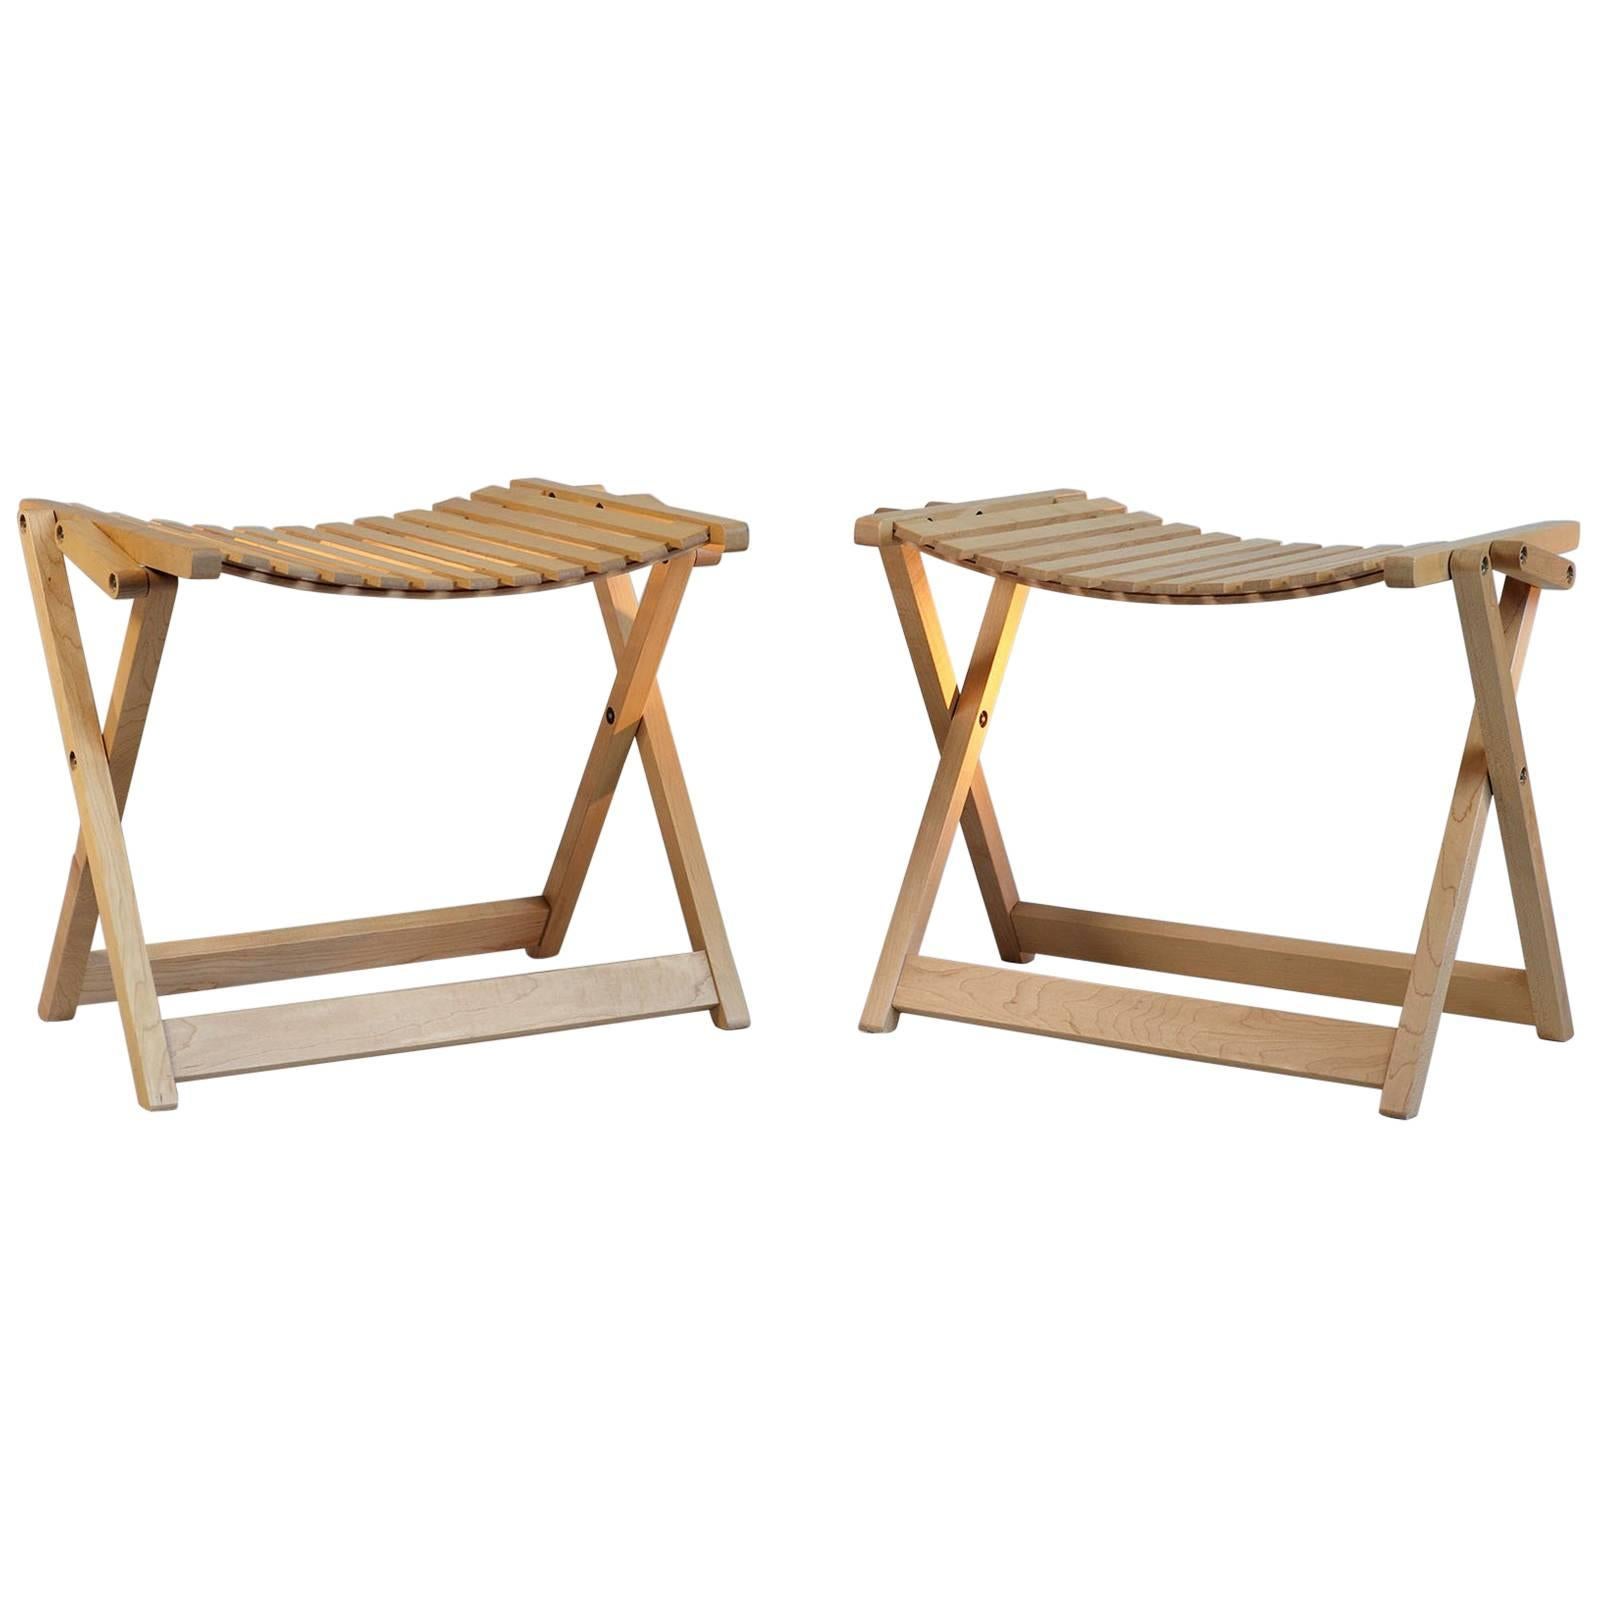 Jean-Claude Duboys: Pair of A4 maple stools, France 1980